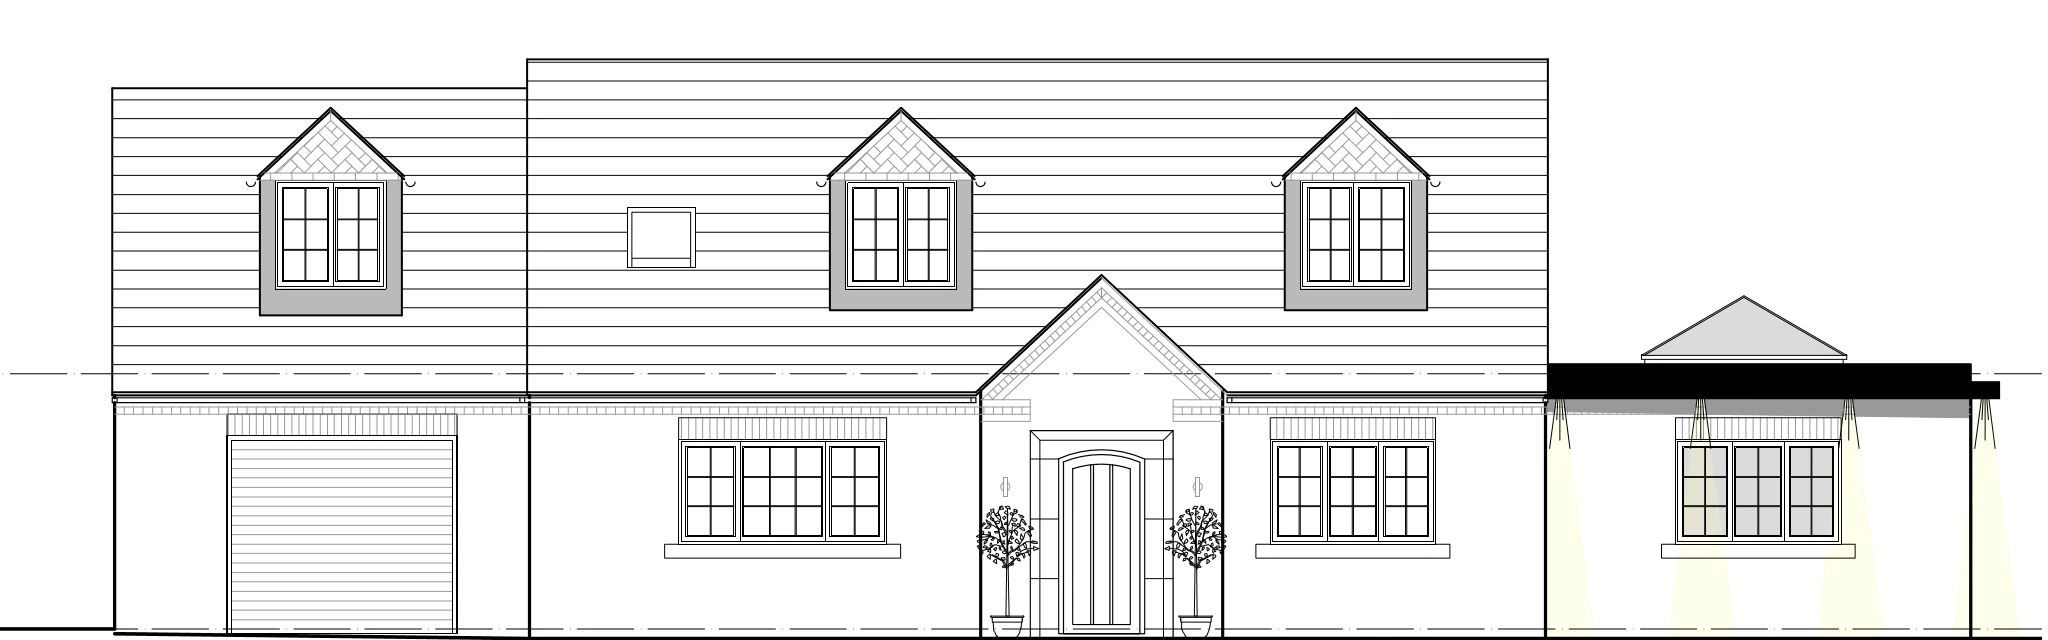 Front elevation architect drawing derbyshire